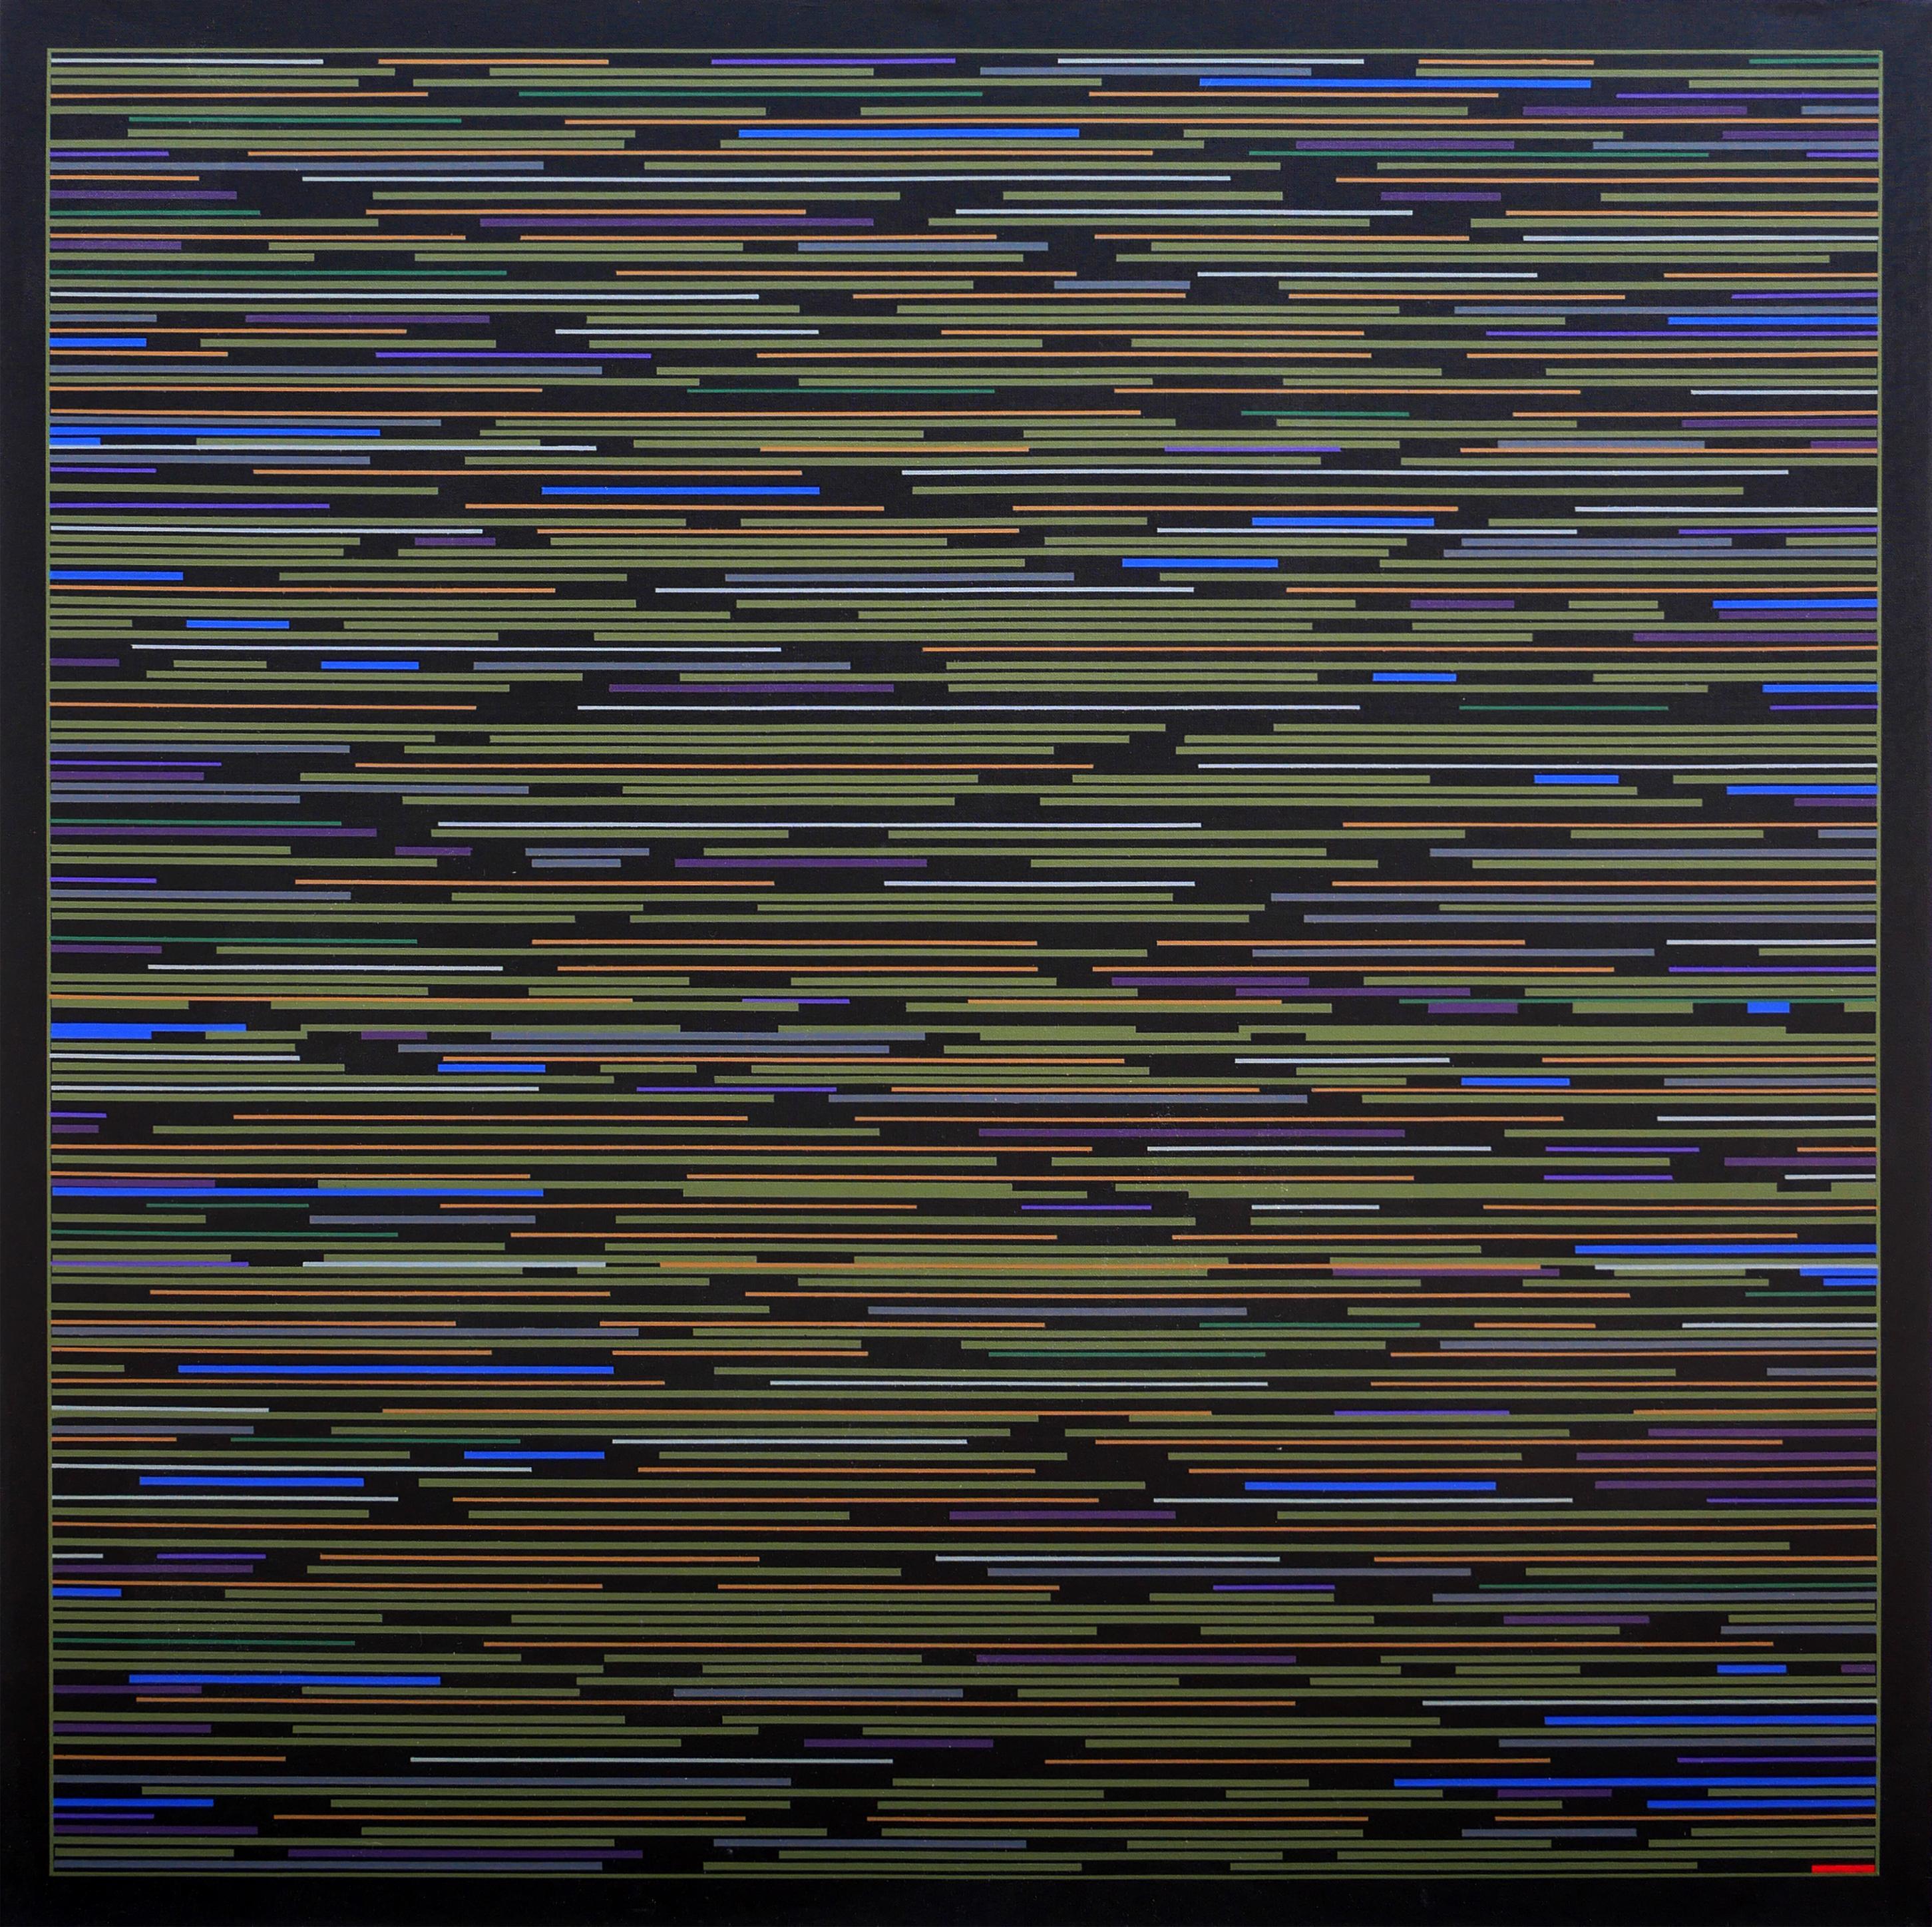 Mark Byckowski Abstract Painting - "VMP 2" Green, Blue and Yellow Striped Abstract Contemporary Painting